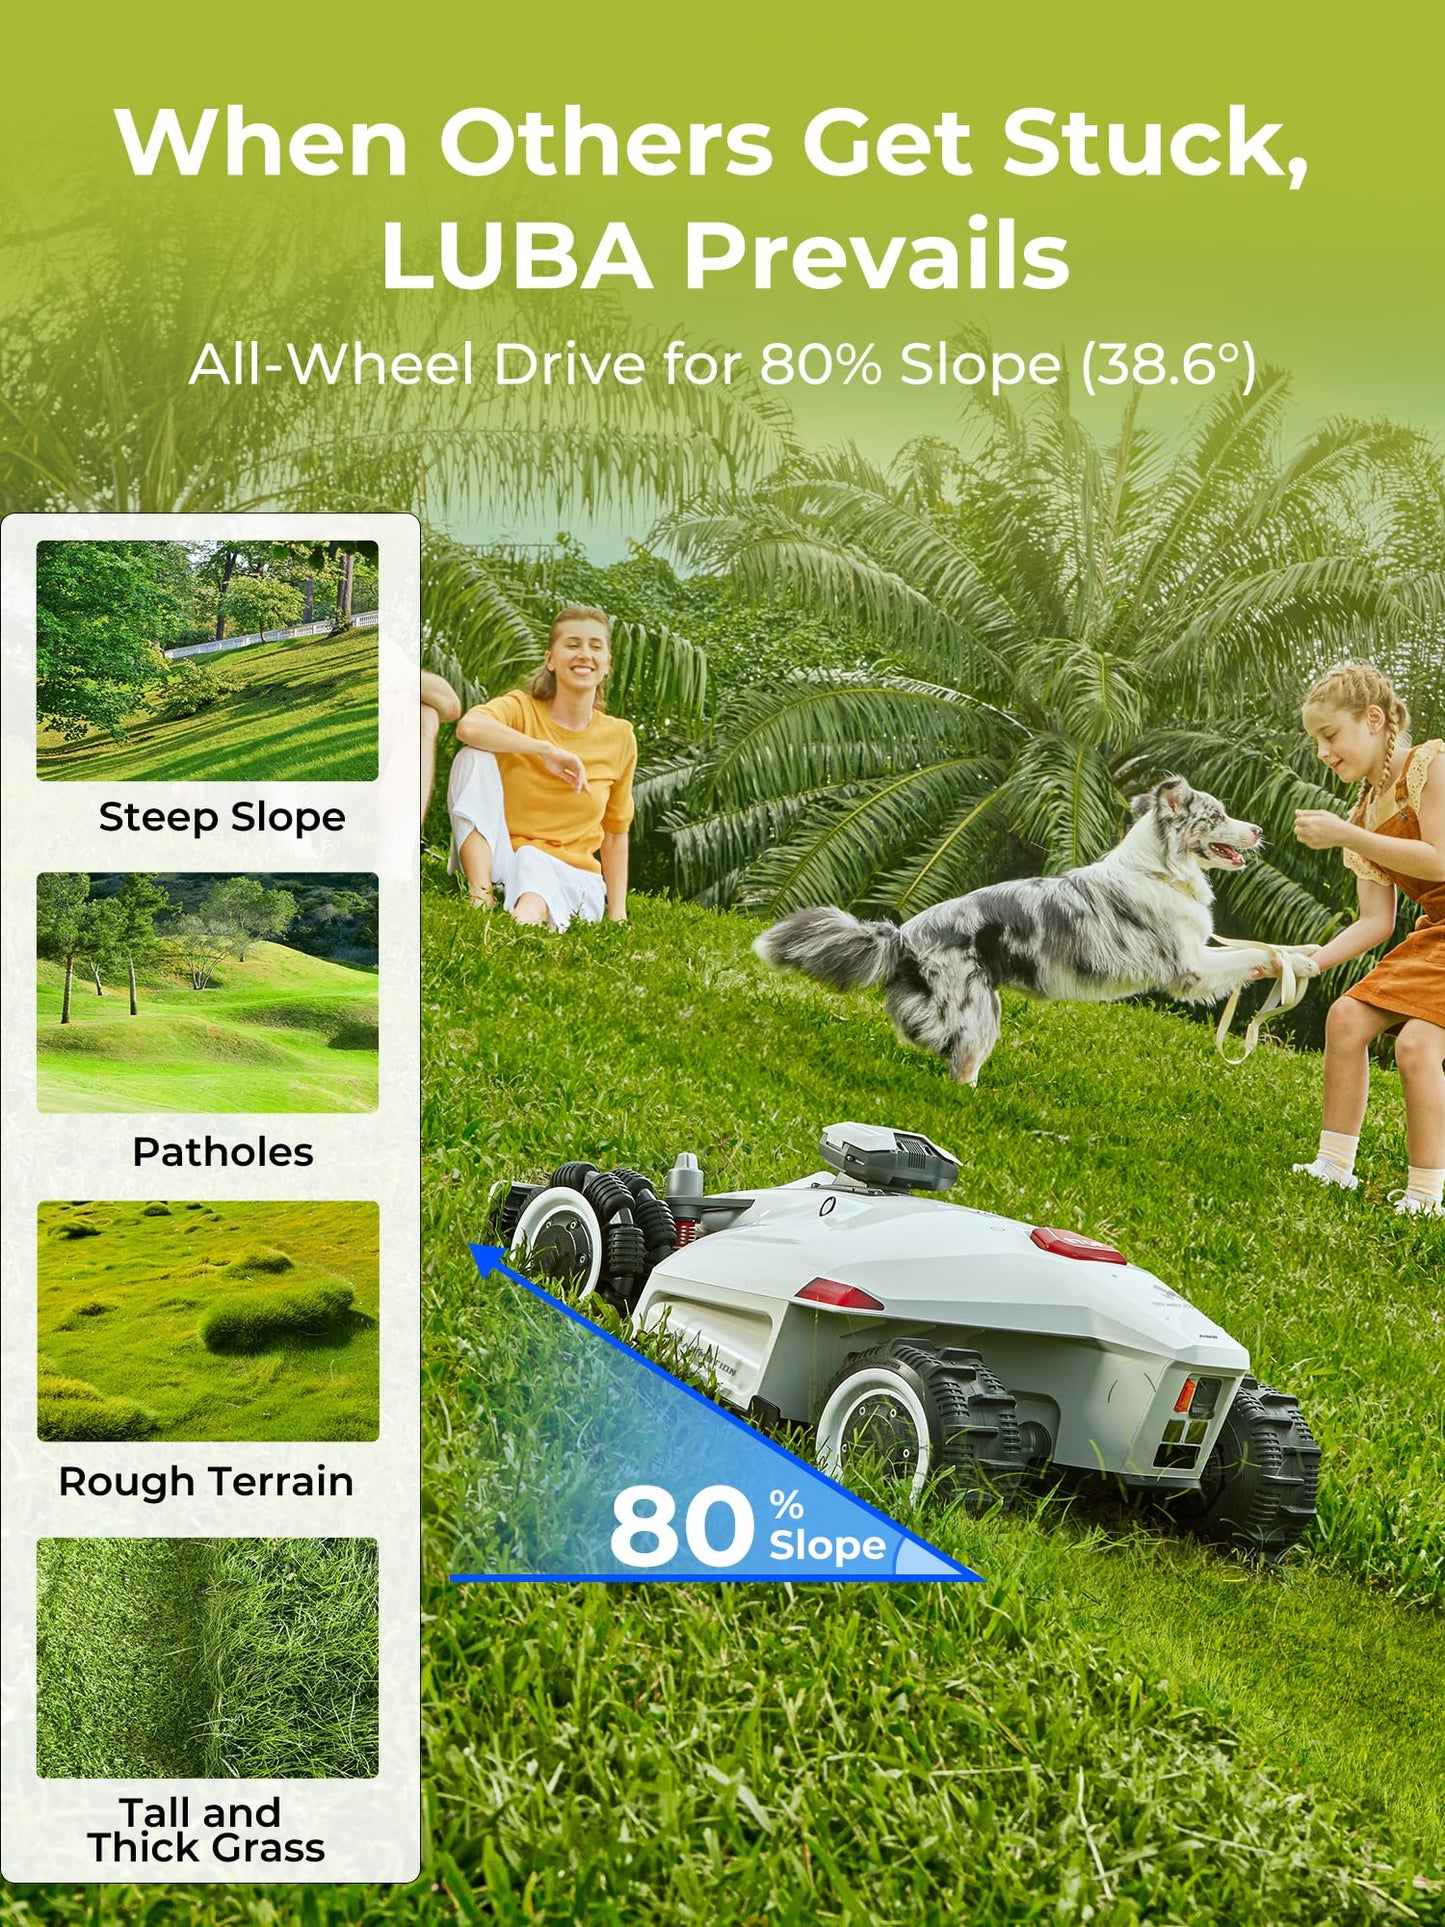 LUBA 2 AWD 10000H Robot Lawn Mower, Perimeter Wire Free Vision Robotic Lawnmower for 2.5 Acres Lawn, Cut Height 2.2"-4.0", 80% Slope, APP Control Compatible with Alexa, All-Wheel Drive, Anti-Theft